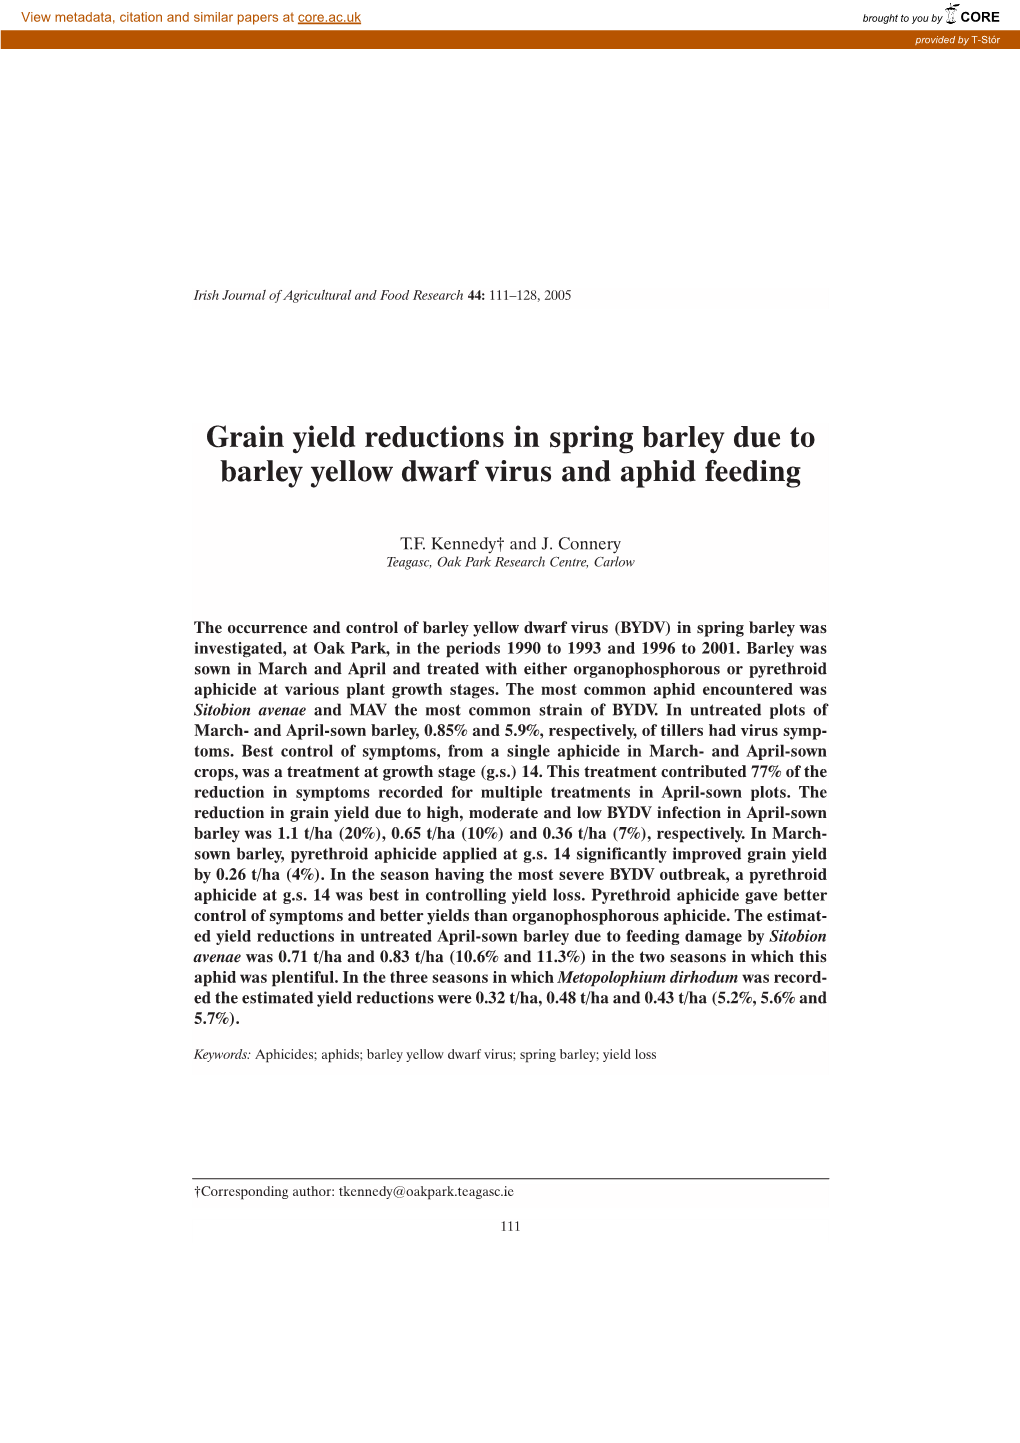 Grain Yield Reductions in Spring Barley Due to Barley Yellow Dwarf Virus and Aphid Feeding